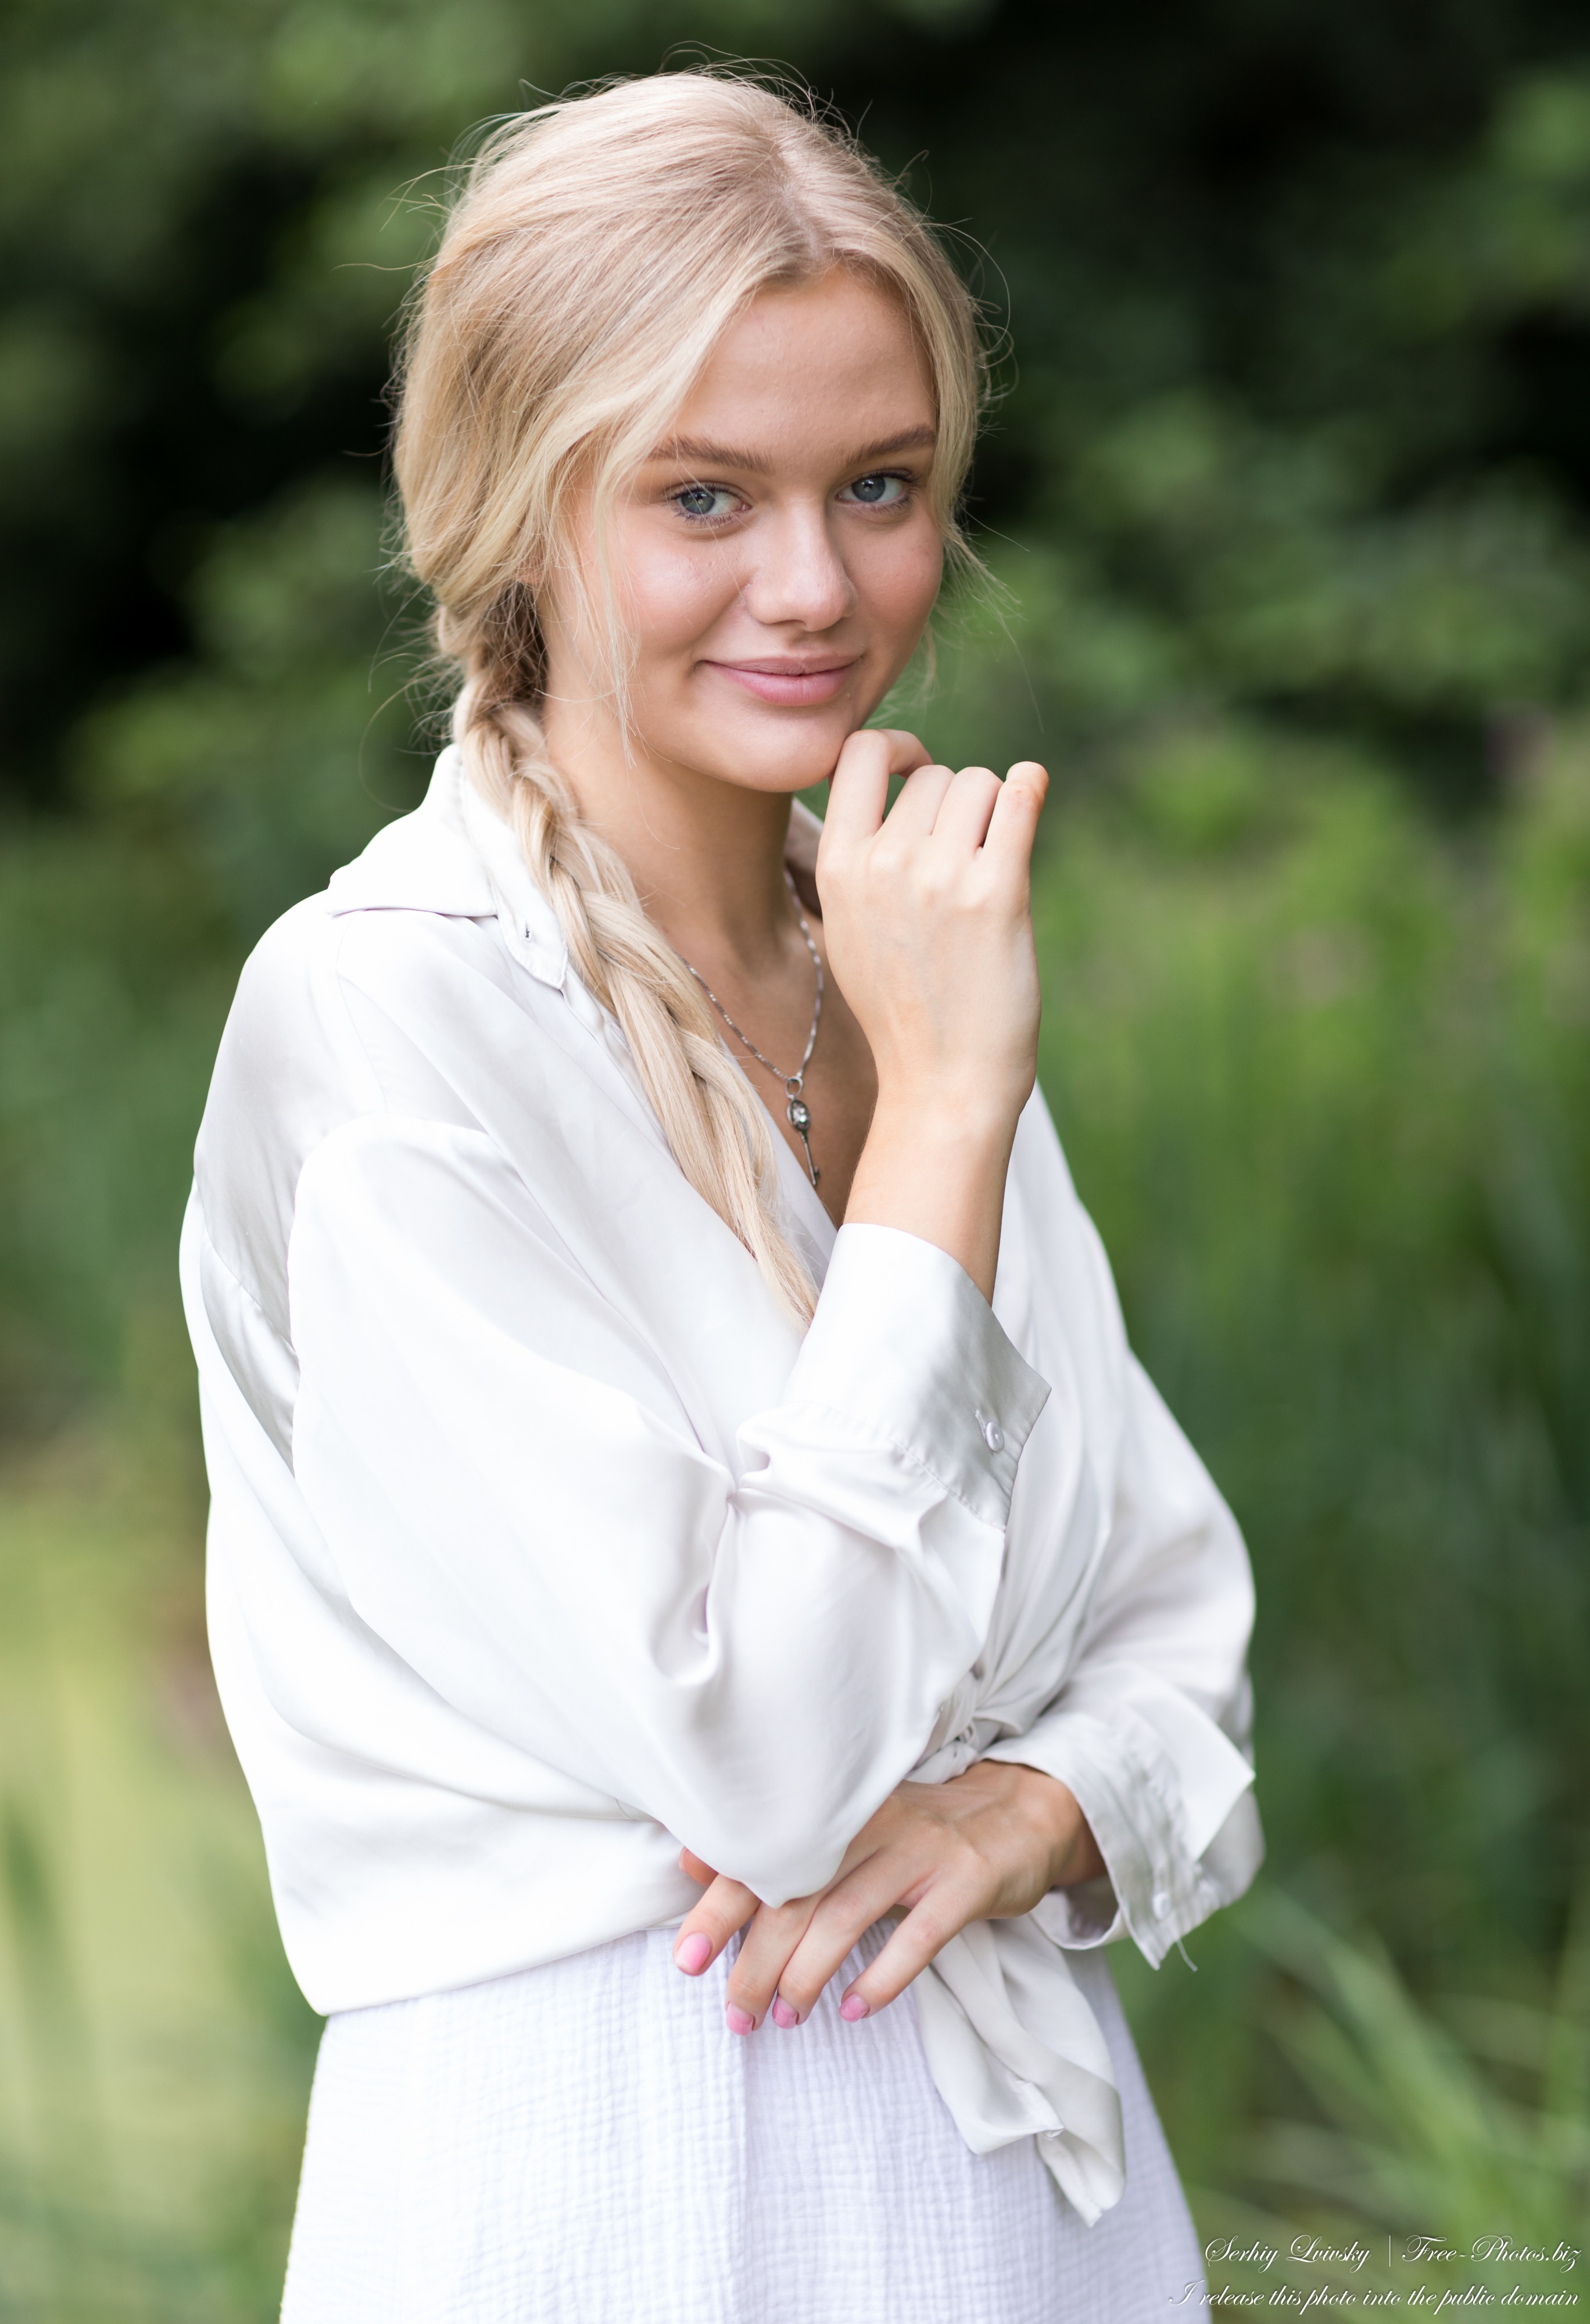 Photo Of Oksana A Natural Blonde 19 Year Old Girl Photographed In July 2021 By Serhiy Lvivsky